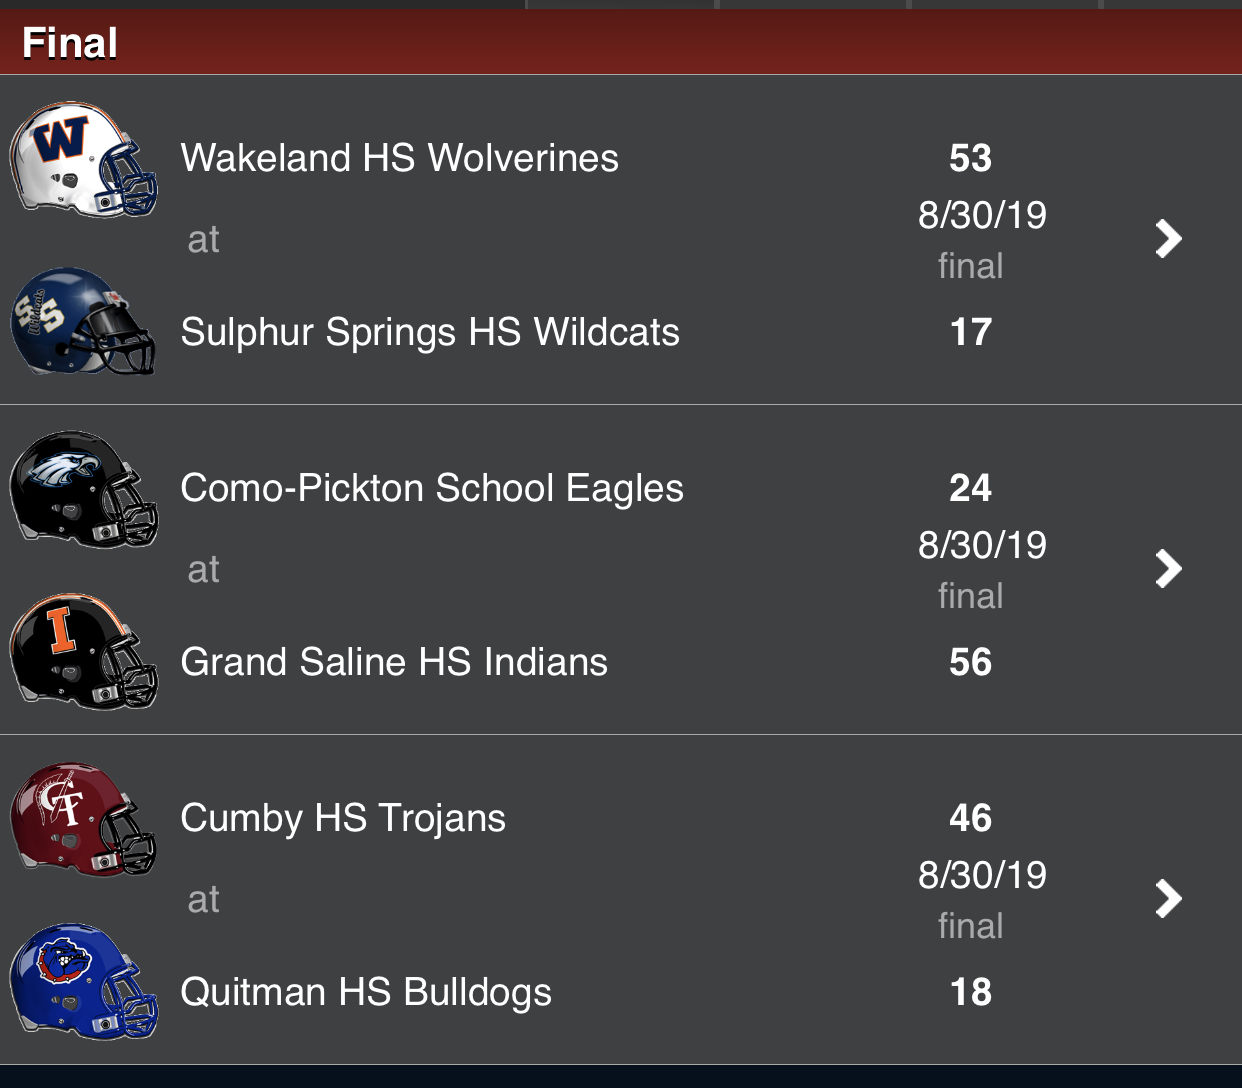 Friday Night Scores: Cumby Trojans Invade Quitman and Pick Up Big Victory. Sulphur Springs and Como-Pickton Open Up with Losses.